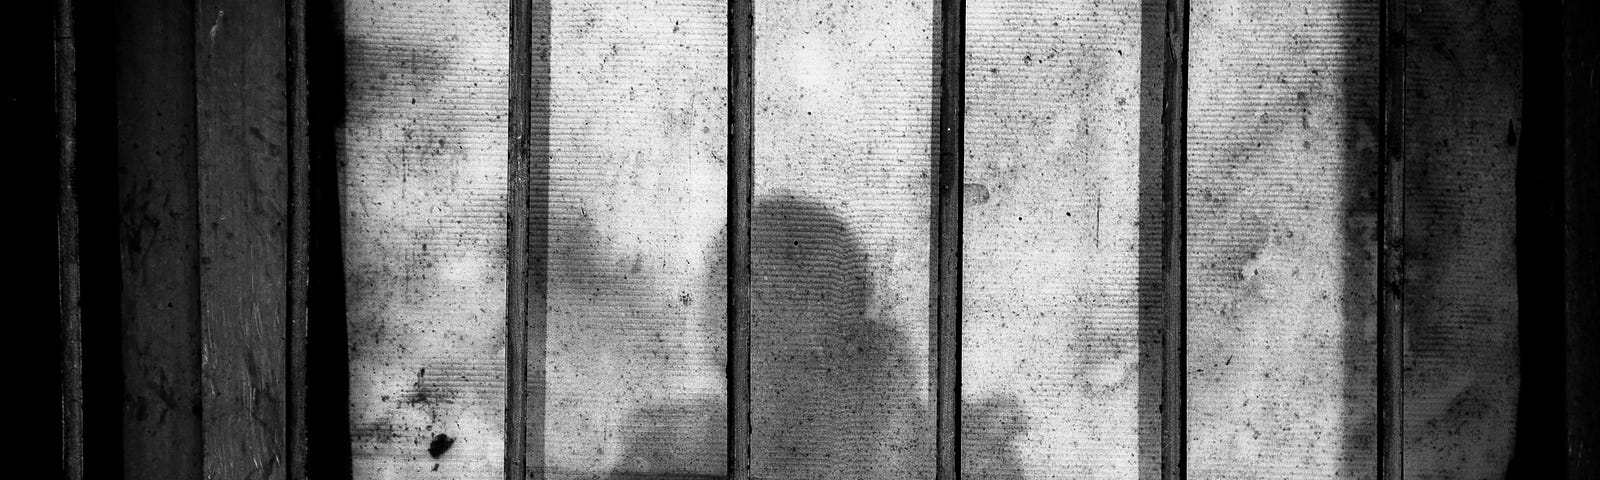 haunting black and white image of a shadow of someone showing through canvas drawn curtains behind a barred window